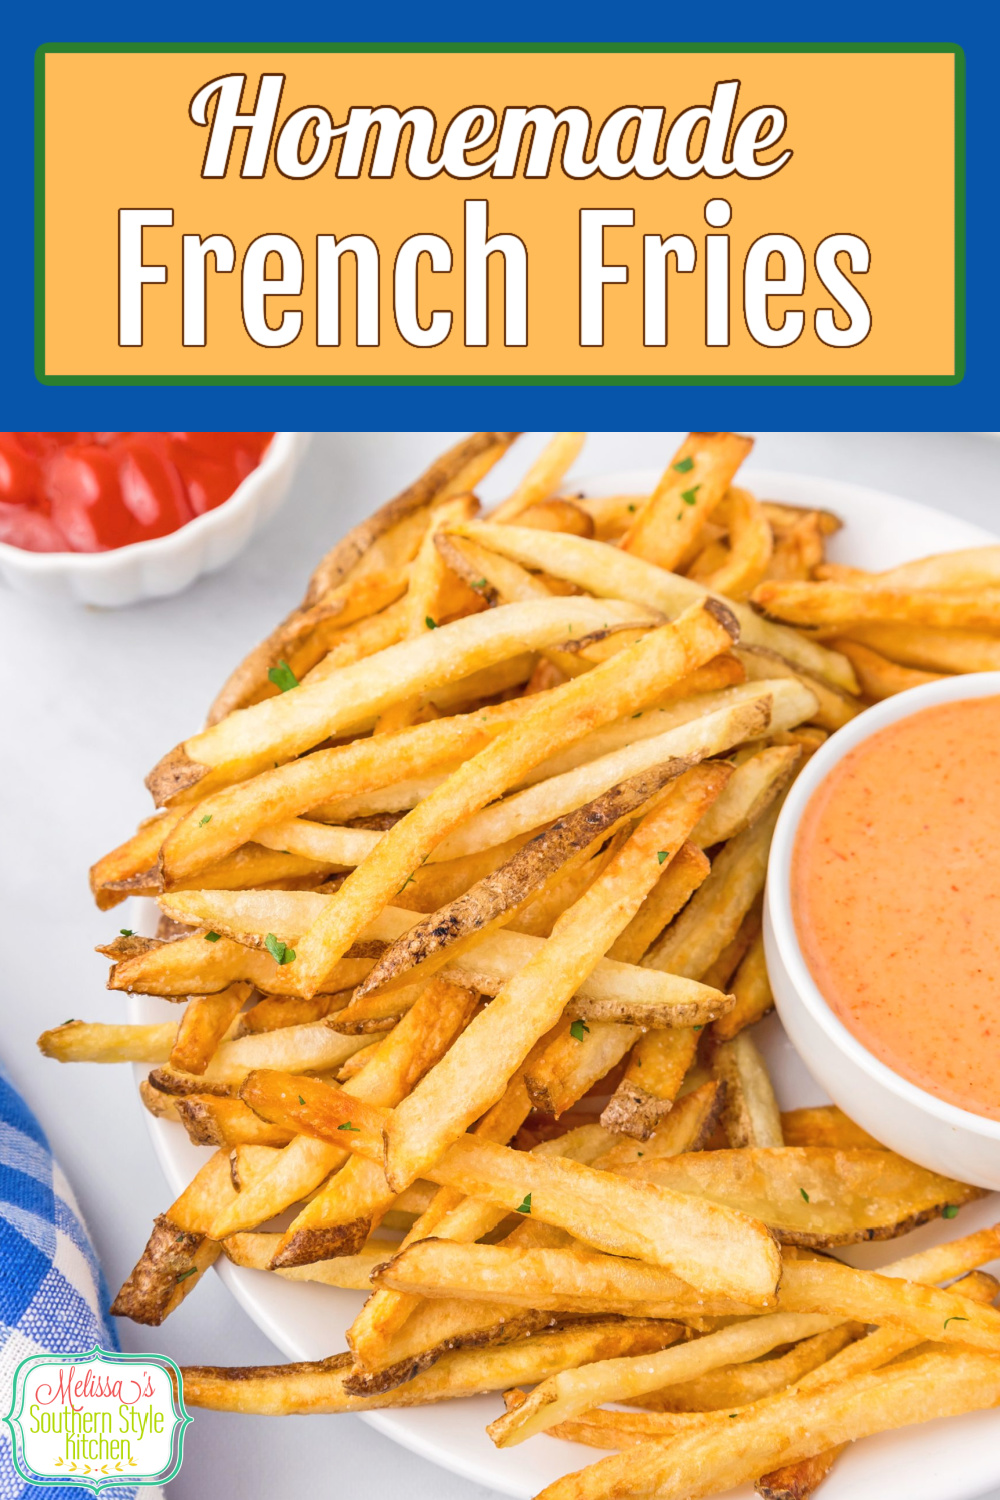 Homemade French Fries are a can't-miss side dish you can make at home. #frenchfries #homemadefrenchfries #easyfrenchfries #frenchfriesrecipe #potatorecipes #potatoes #fries #russetpotatoes #russetpotatorecipes via @melissasssk